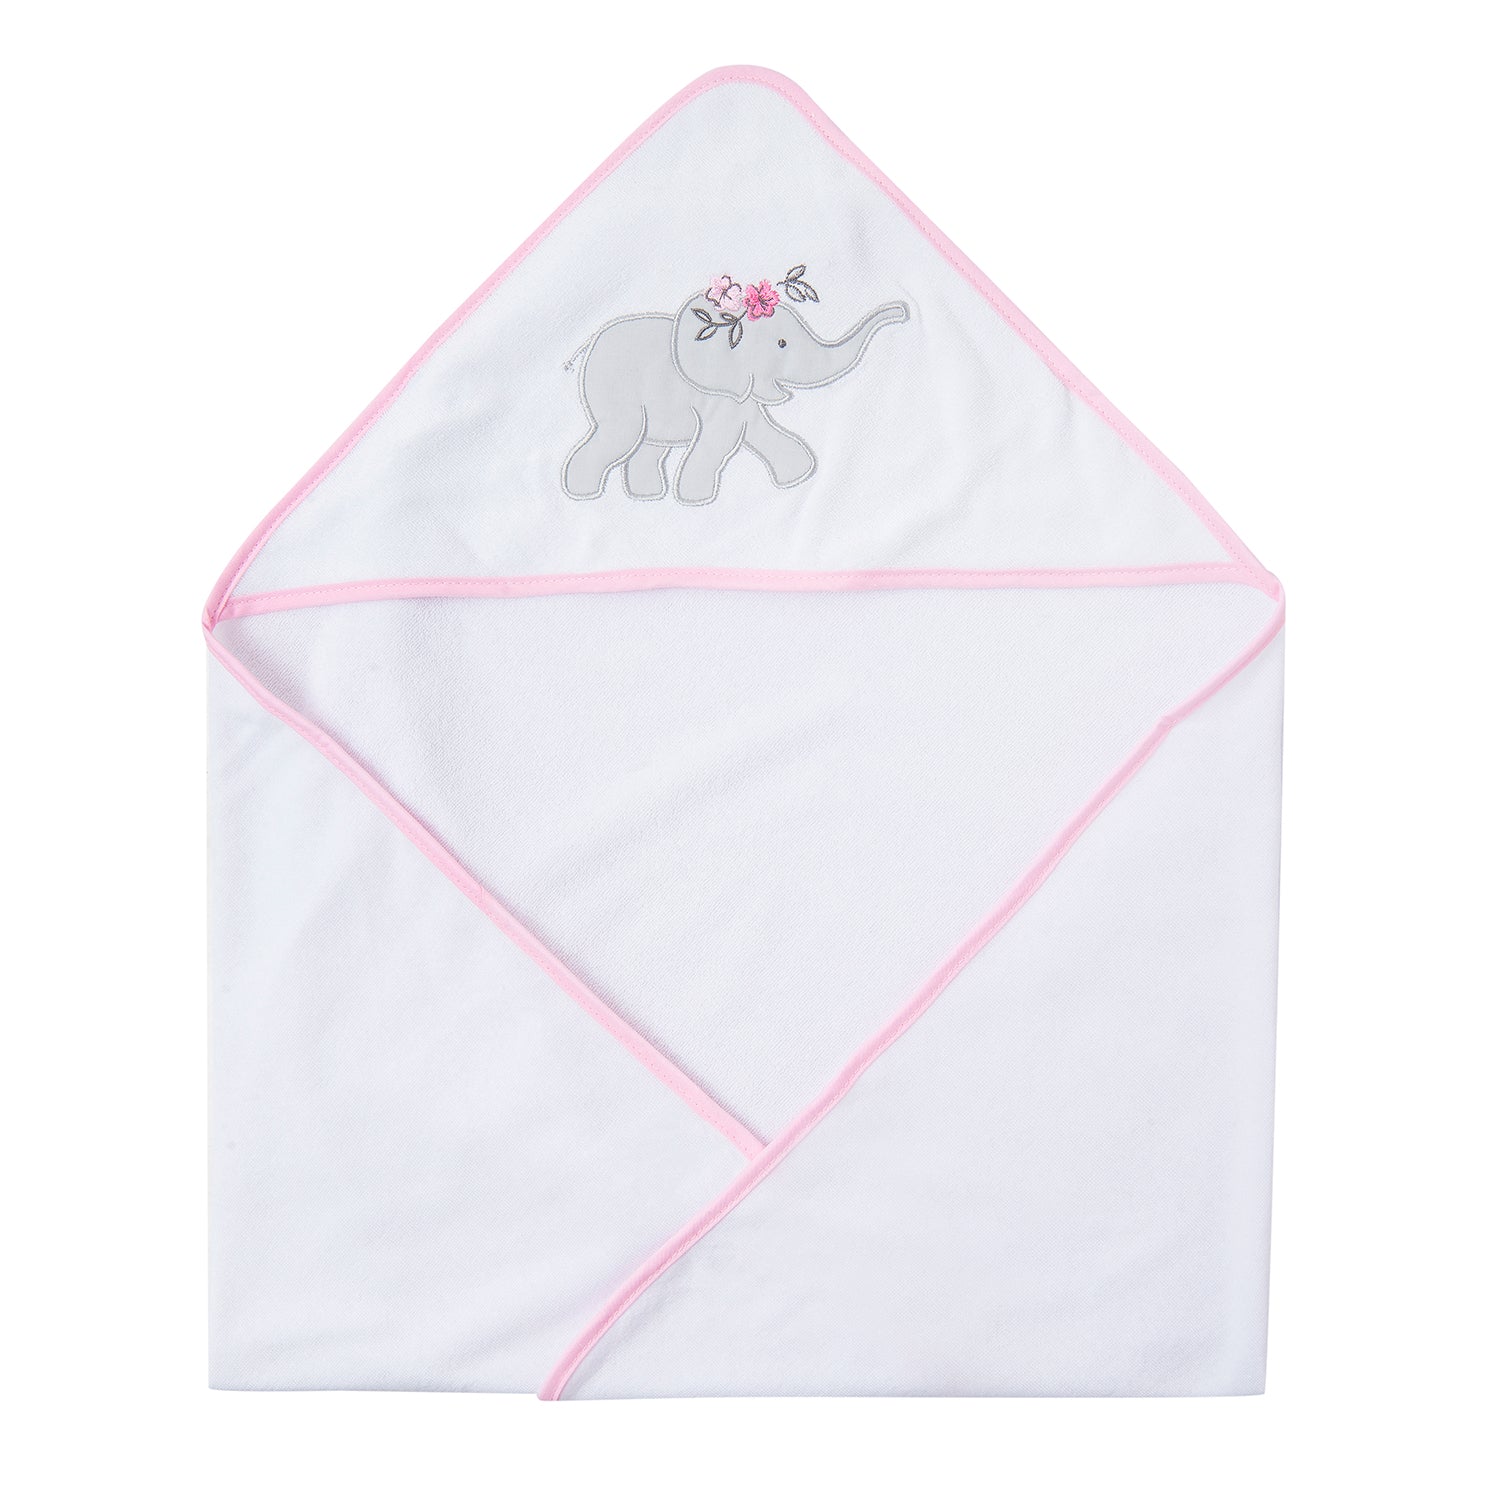 Baby Moo Hooded Towel And 5 Wash Cloth Gift Set Floral Elephant Pink